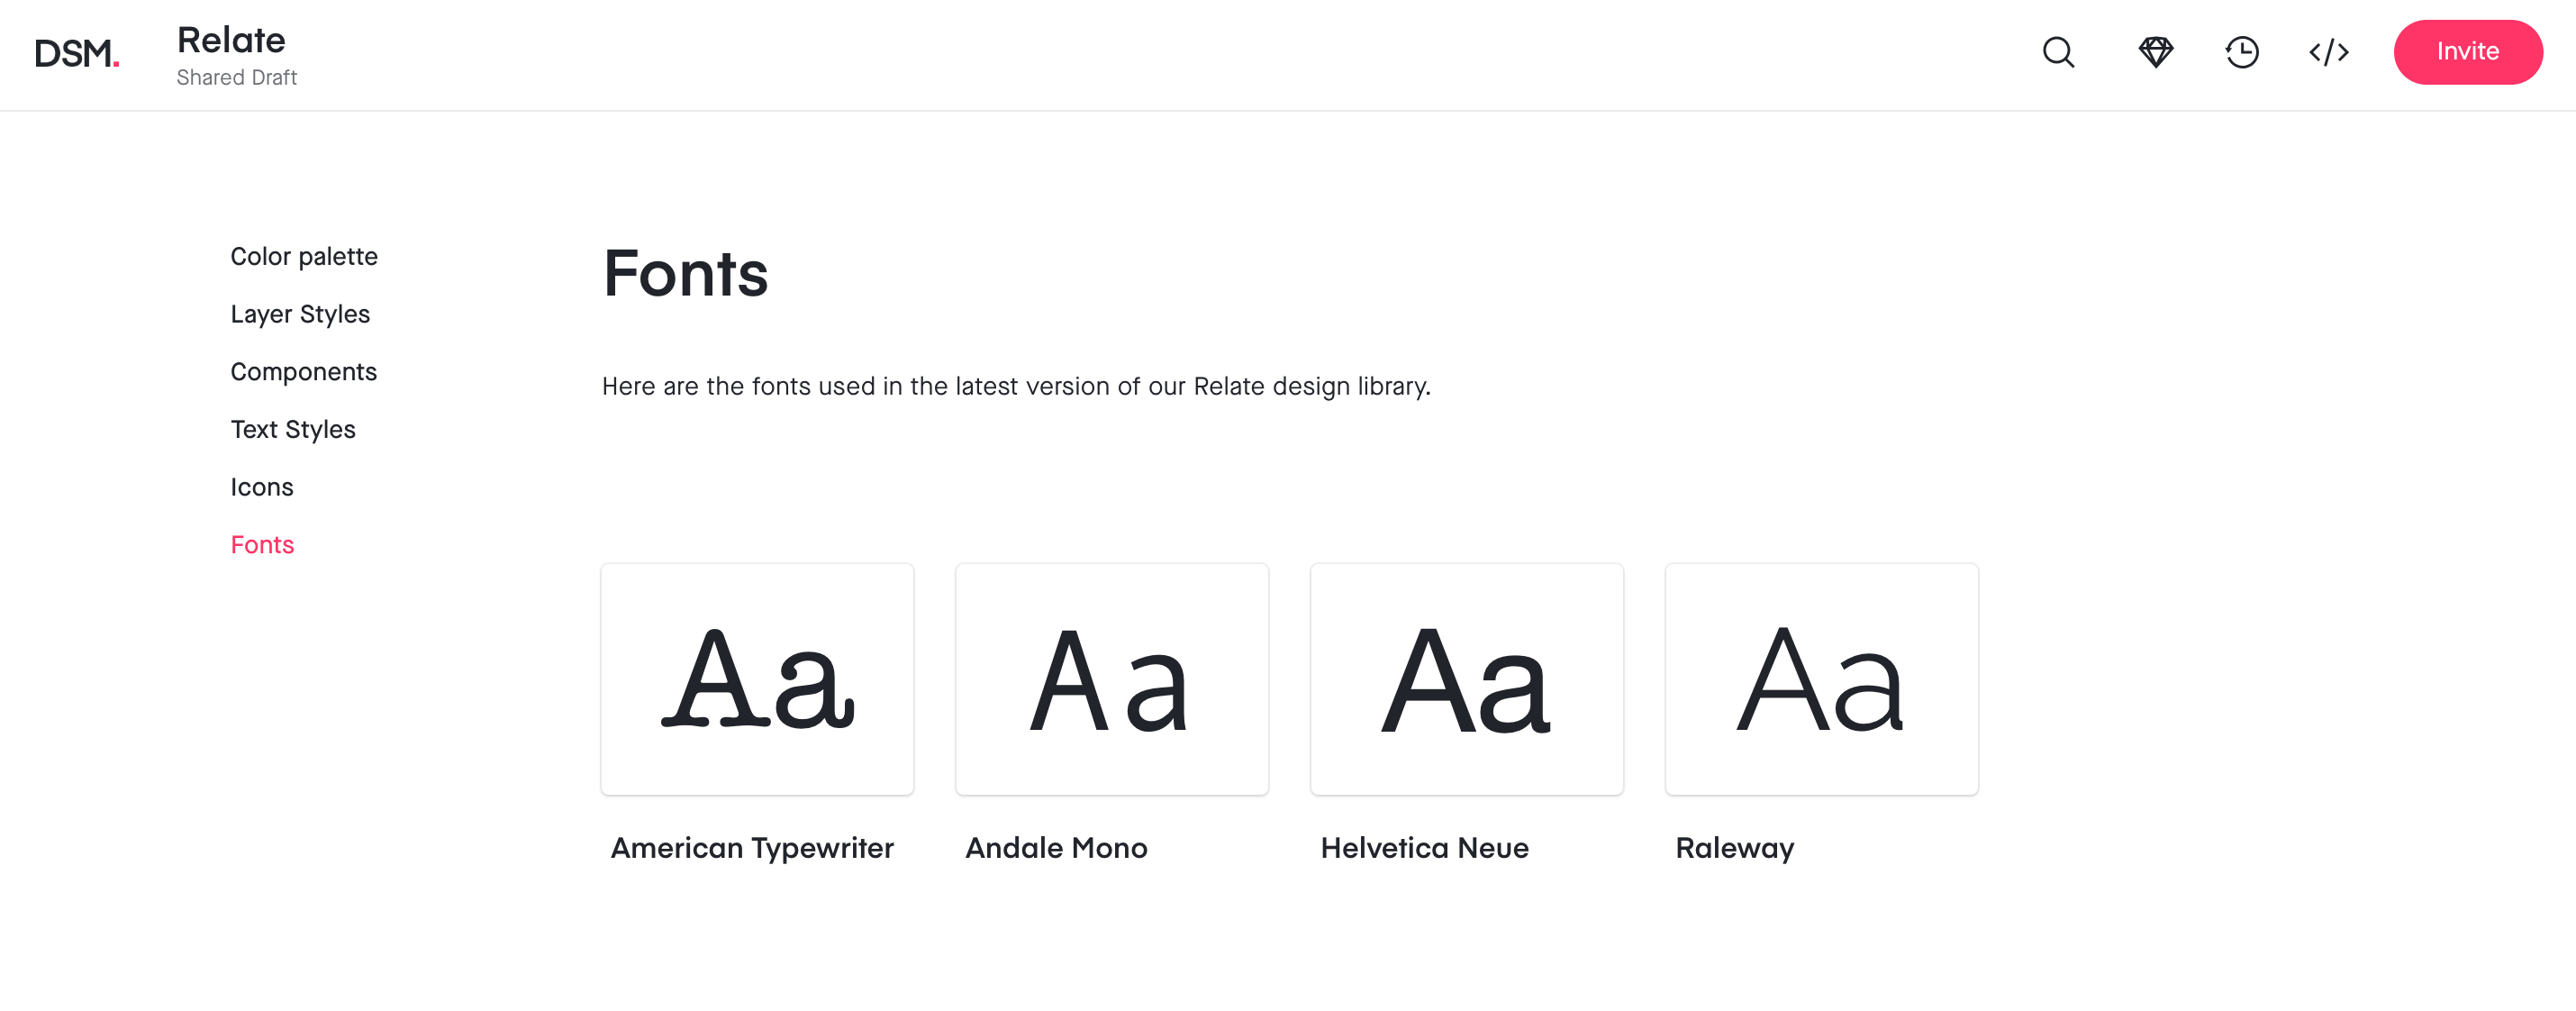 A legacy DSM design system with the Fonts section displayed.